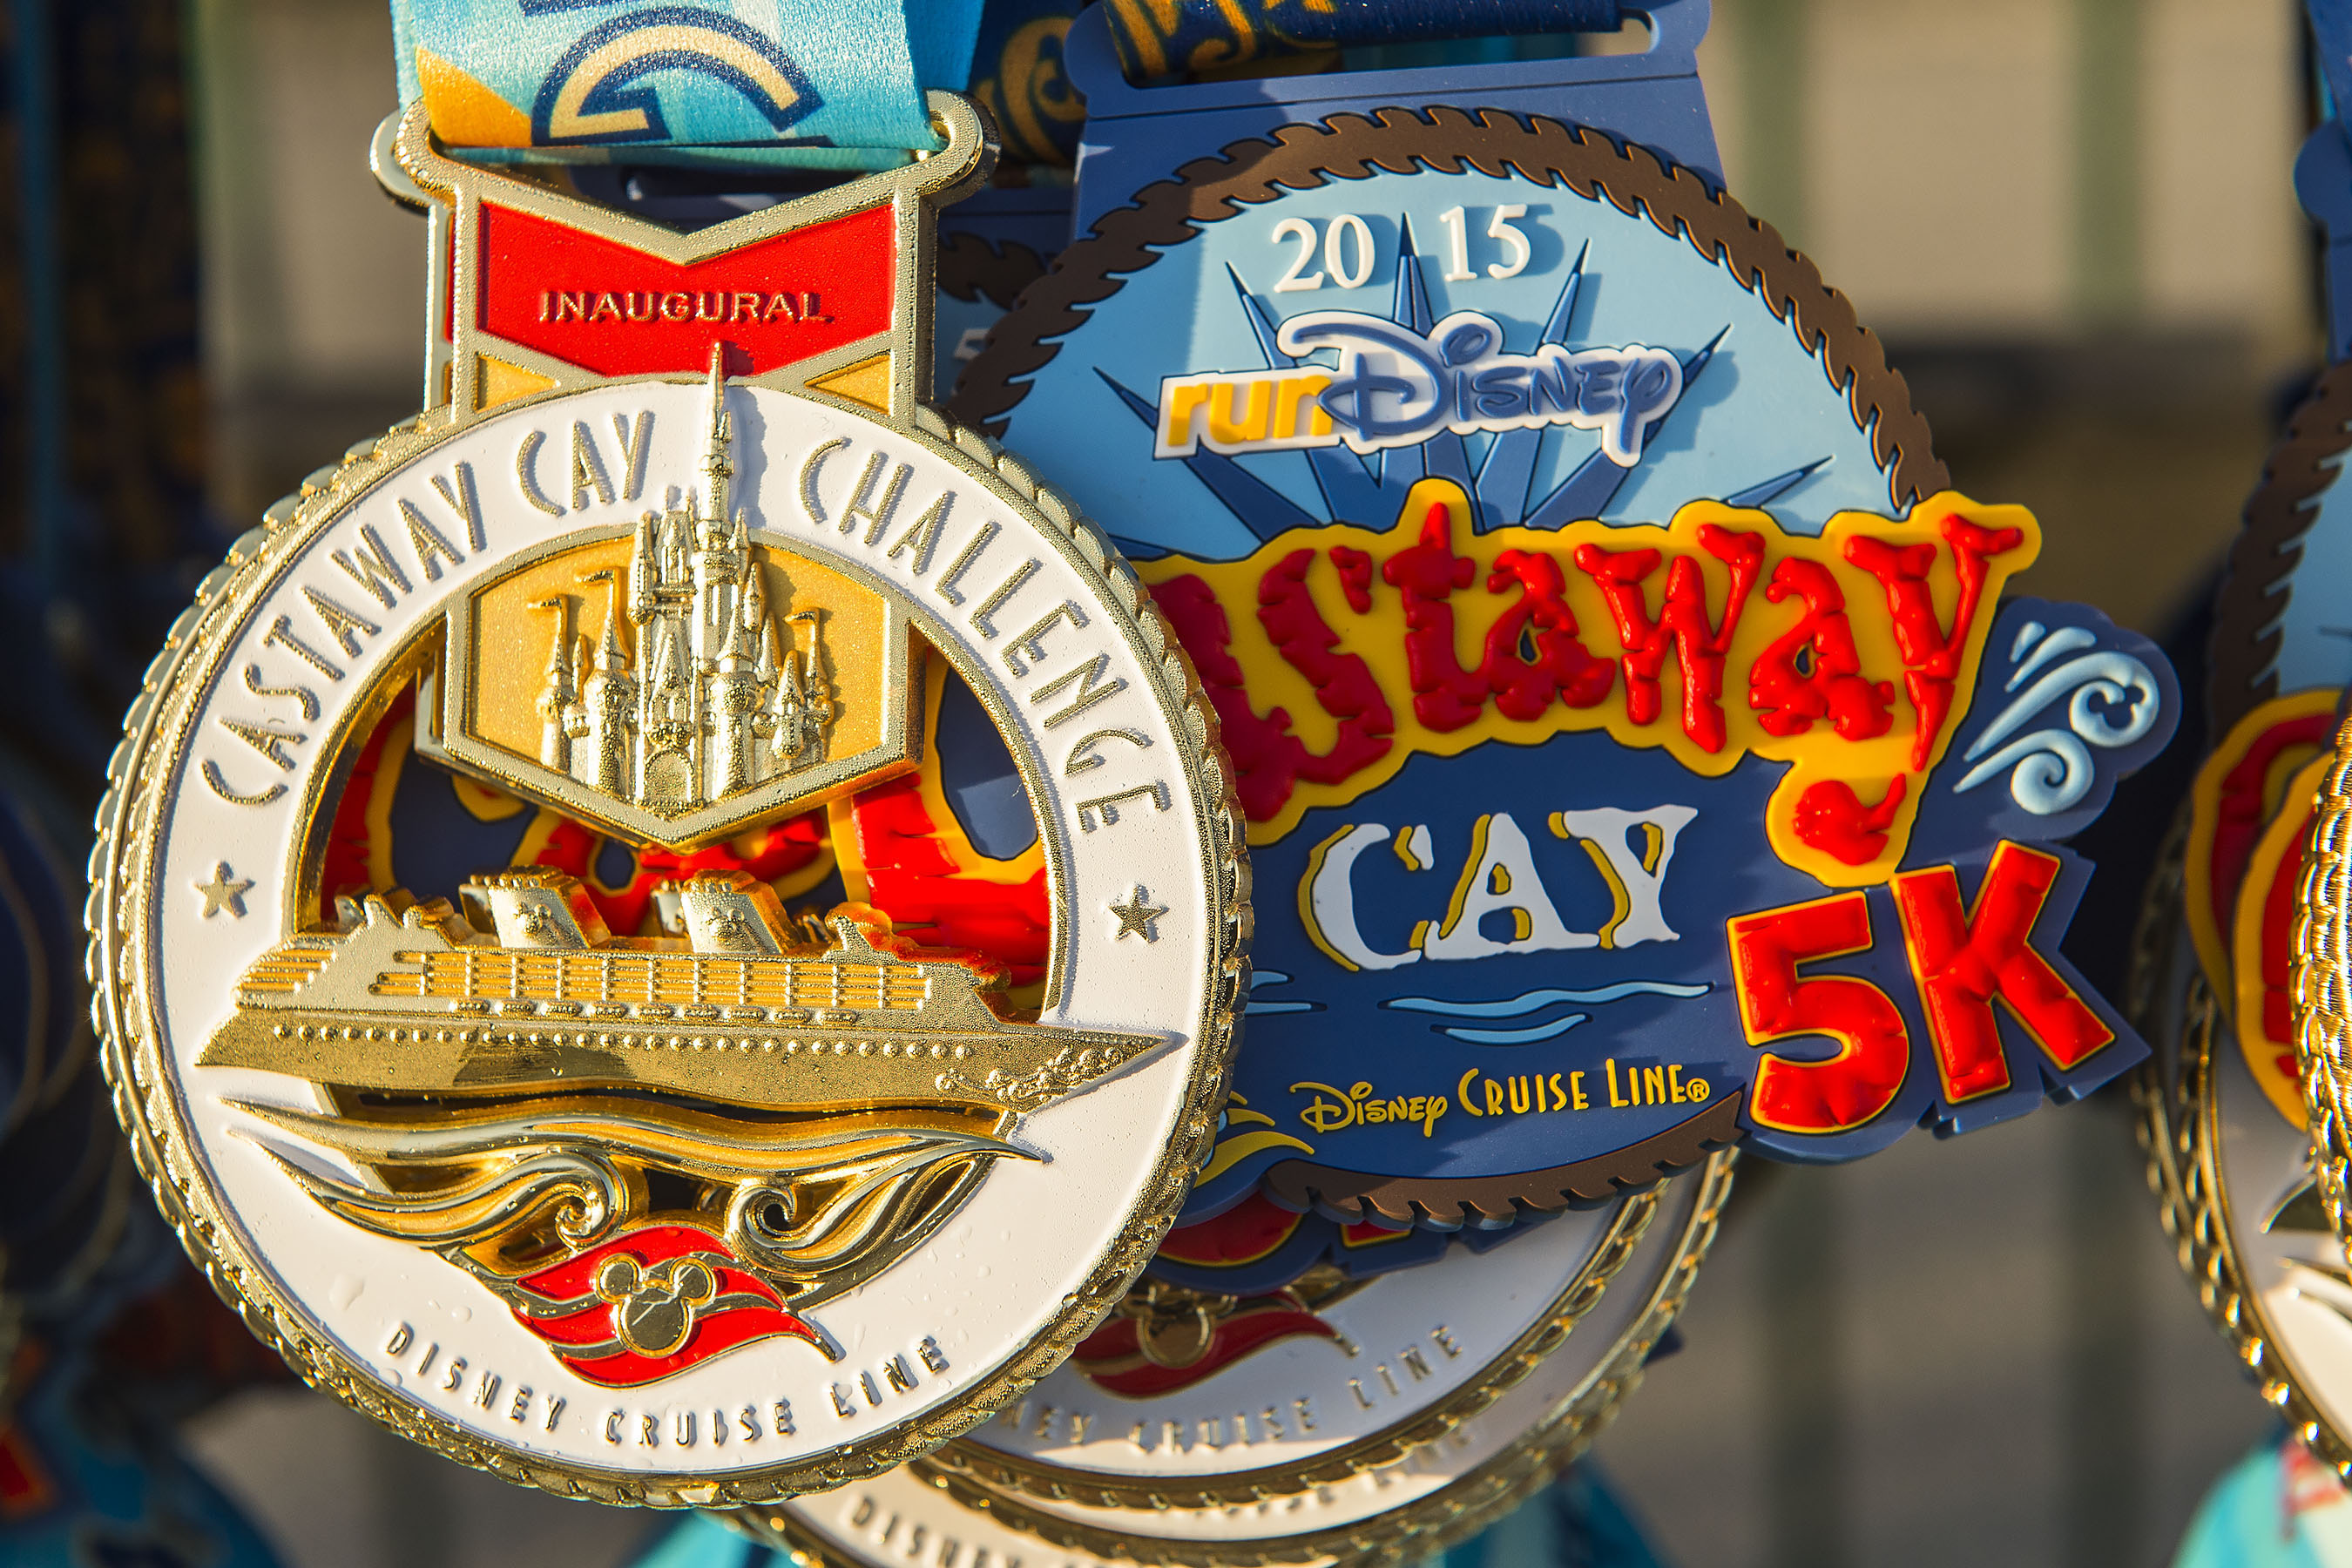 Castaway Cay 5K Everything You Need to Know • Disney Cruise Mom Blog